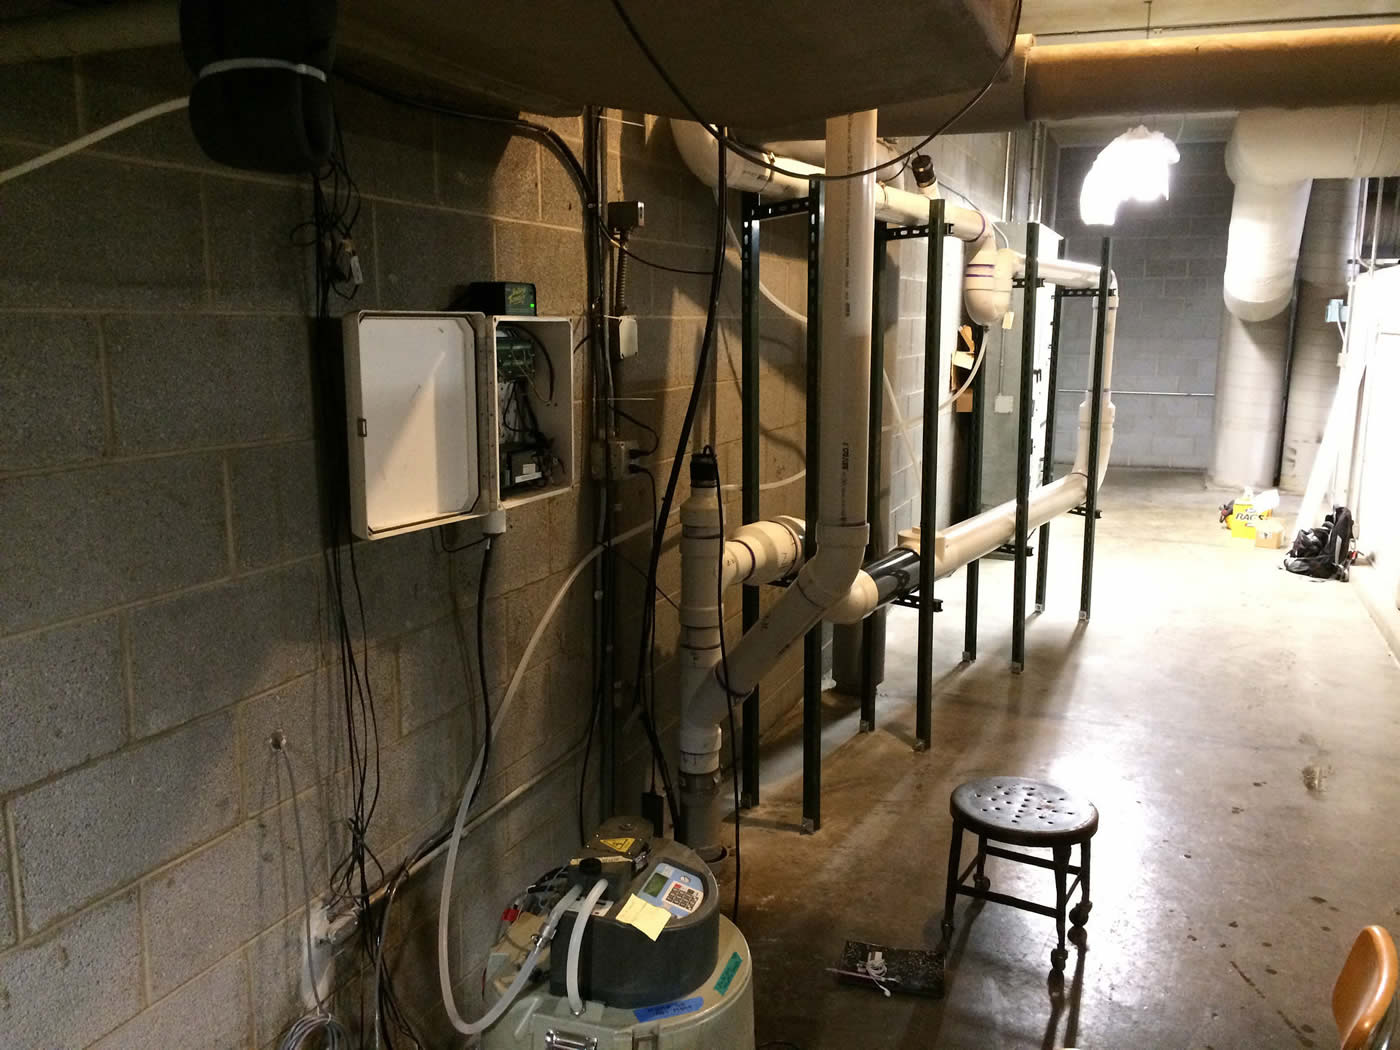 Pipes and automated sampling equipment inside a building.